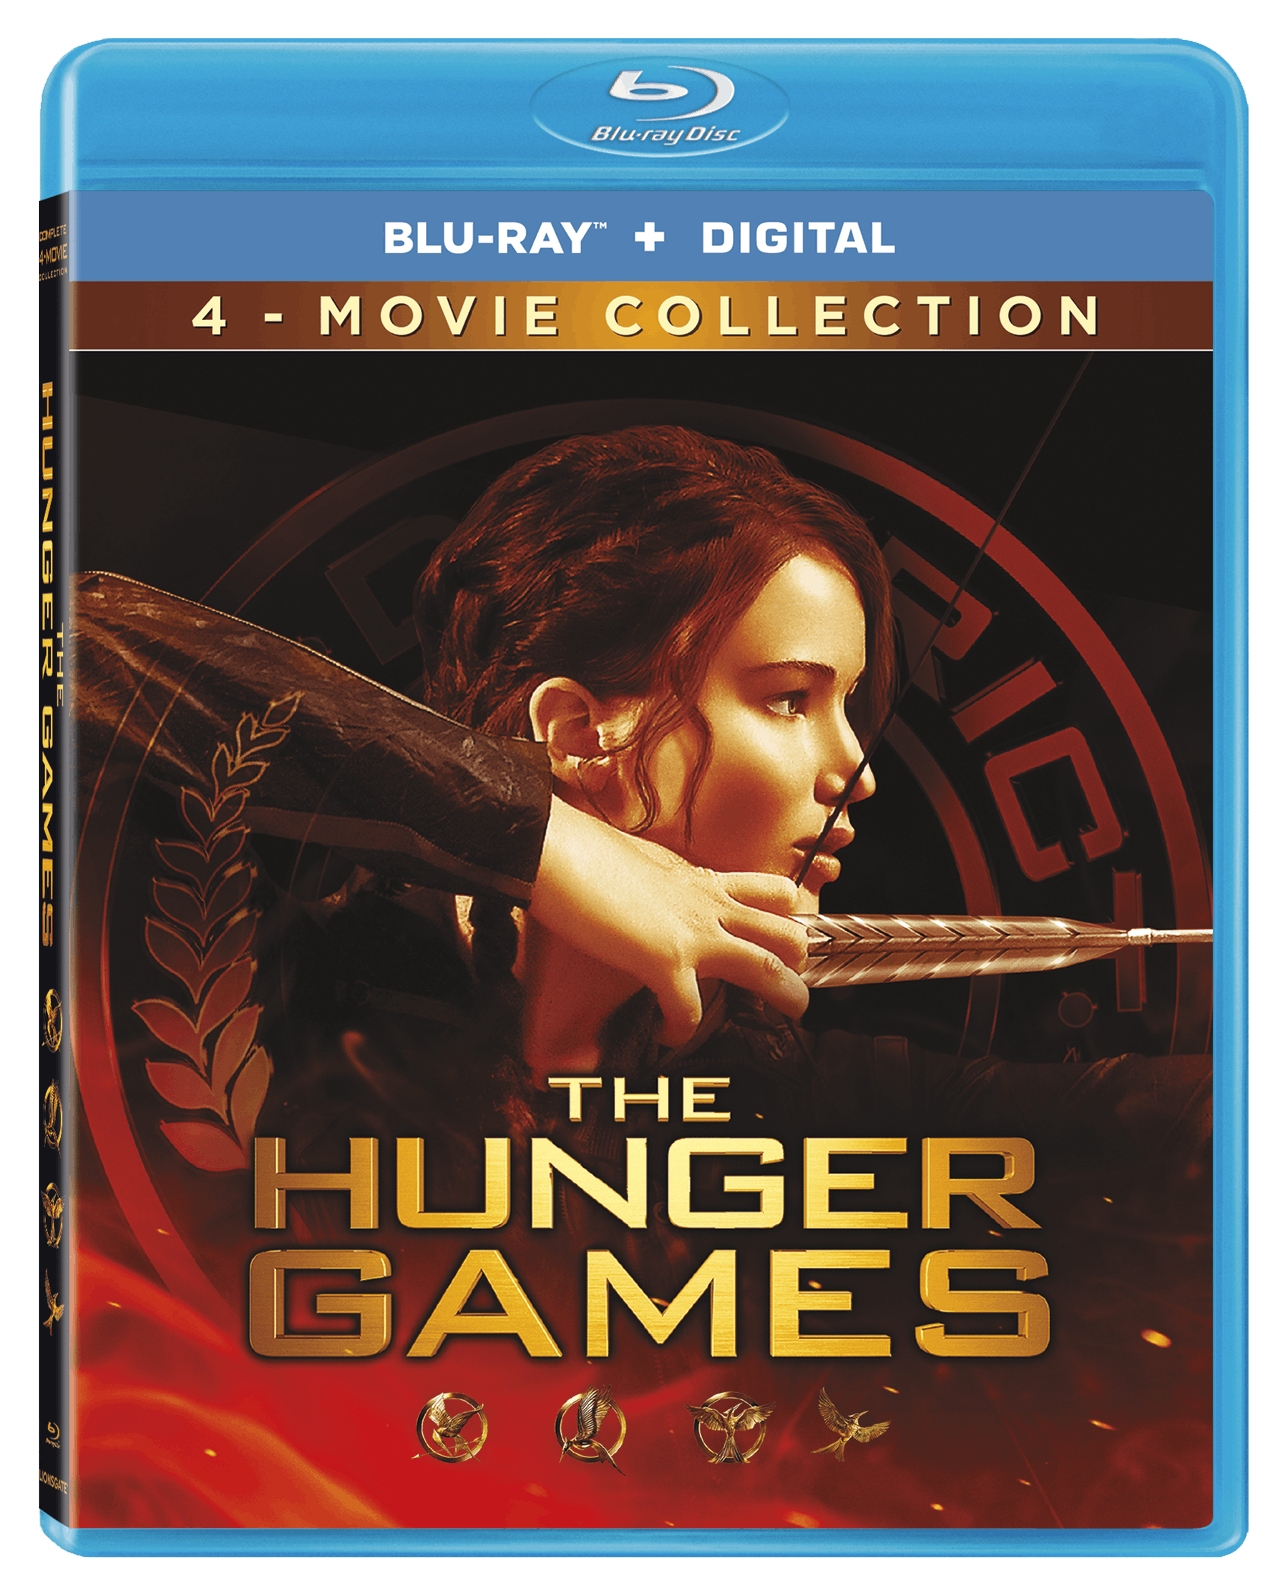 The Hunger Games: Complete 4-film Collection (Blu-ray + Digital Copy)  [Blu-ray]